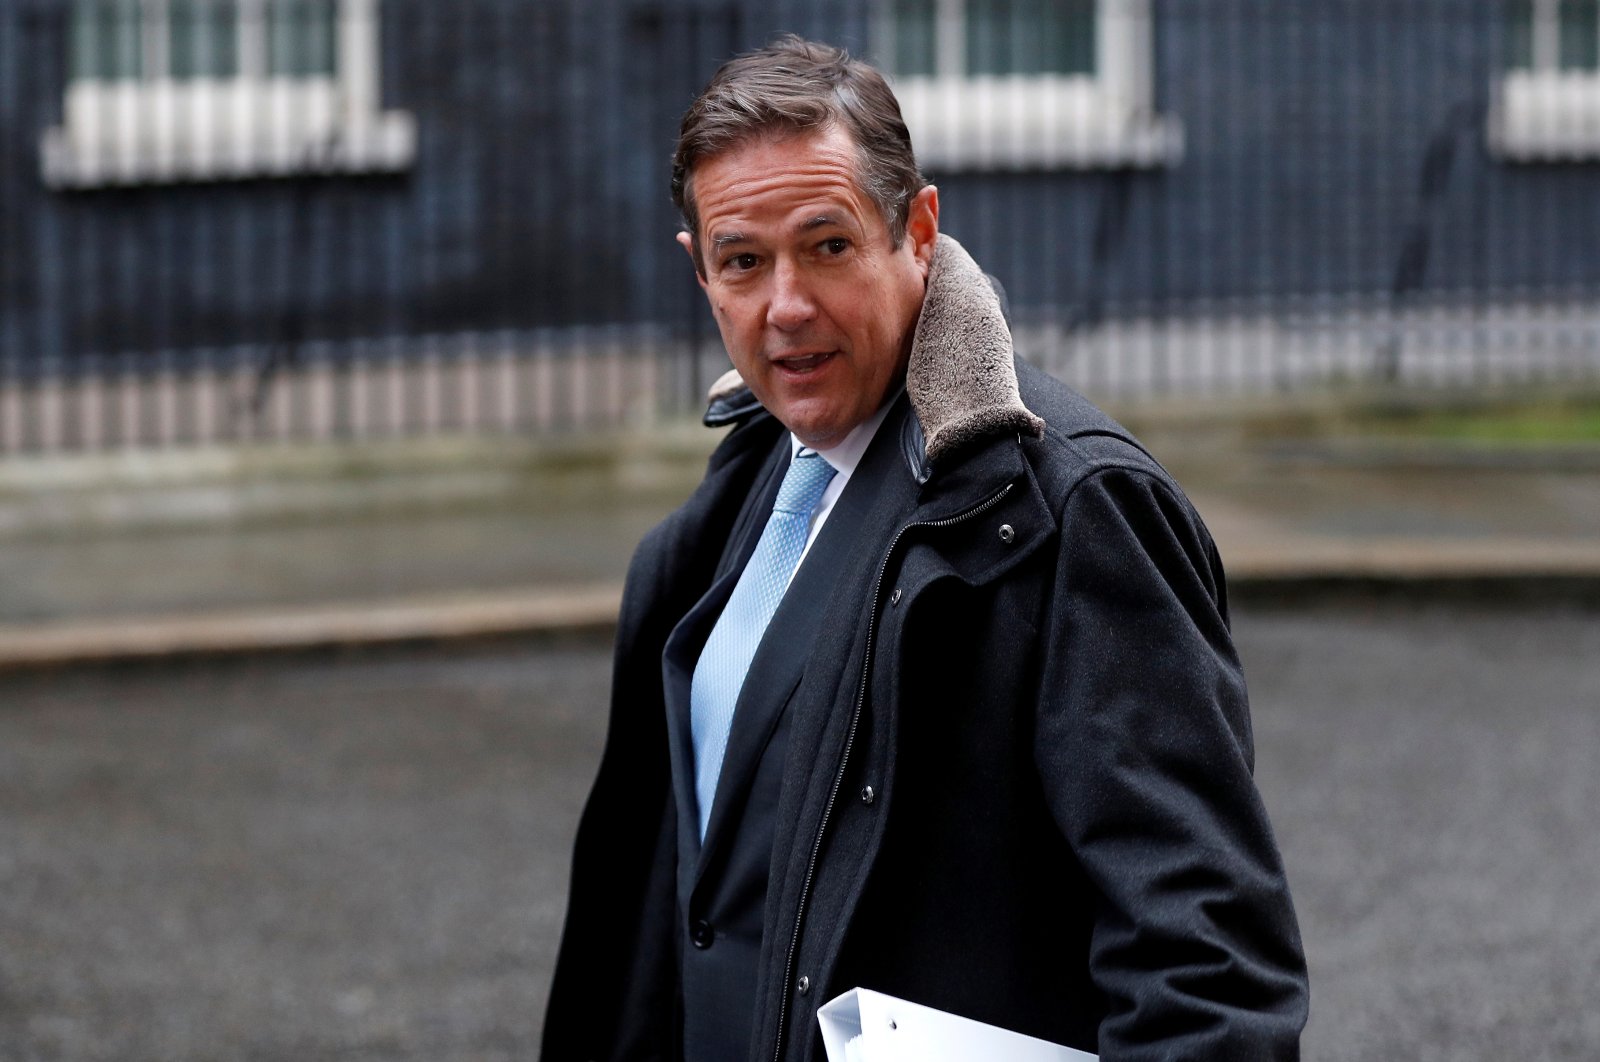 Barclays' CEO Jes Staley arrives at 10 Downing Street in London, Britain, Jan. 11, 2018. (Reuters Photo)